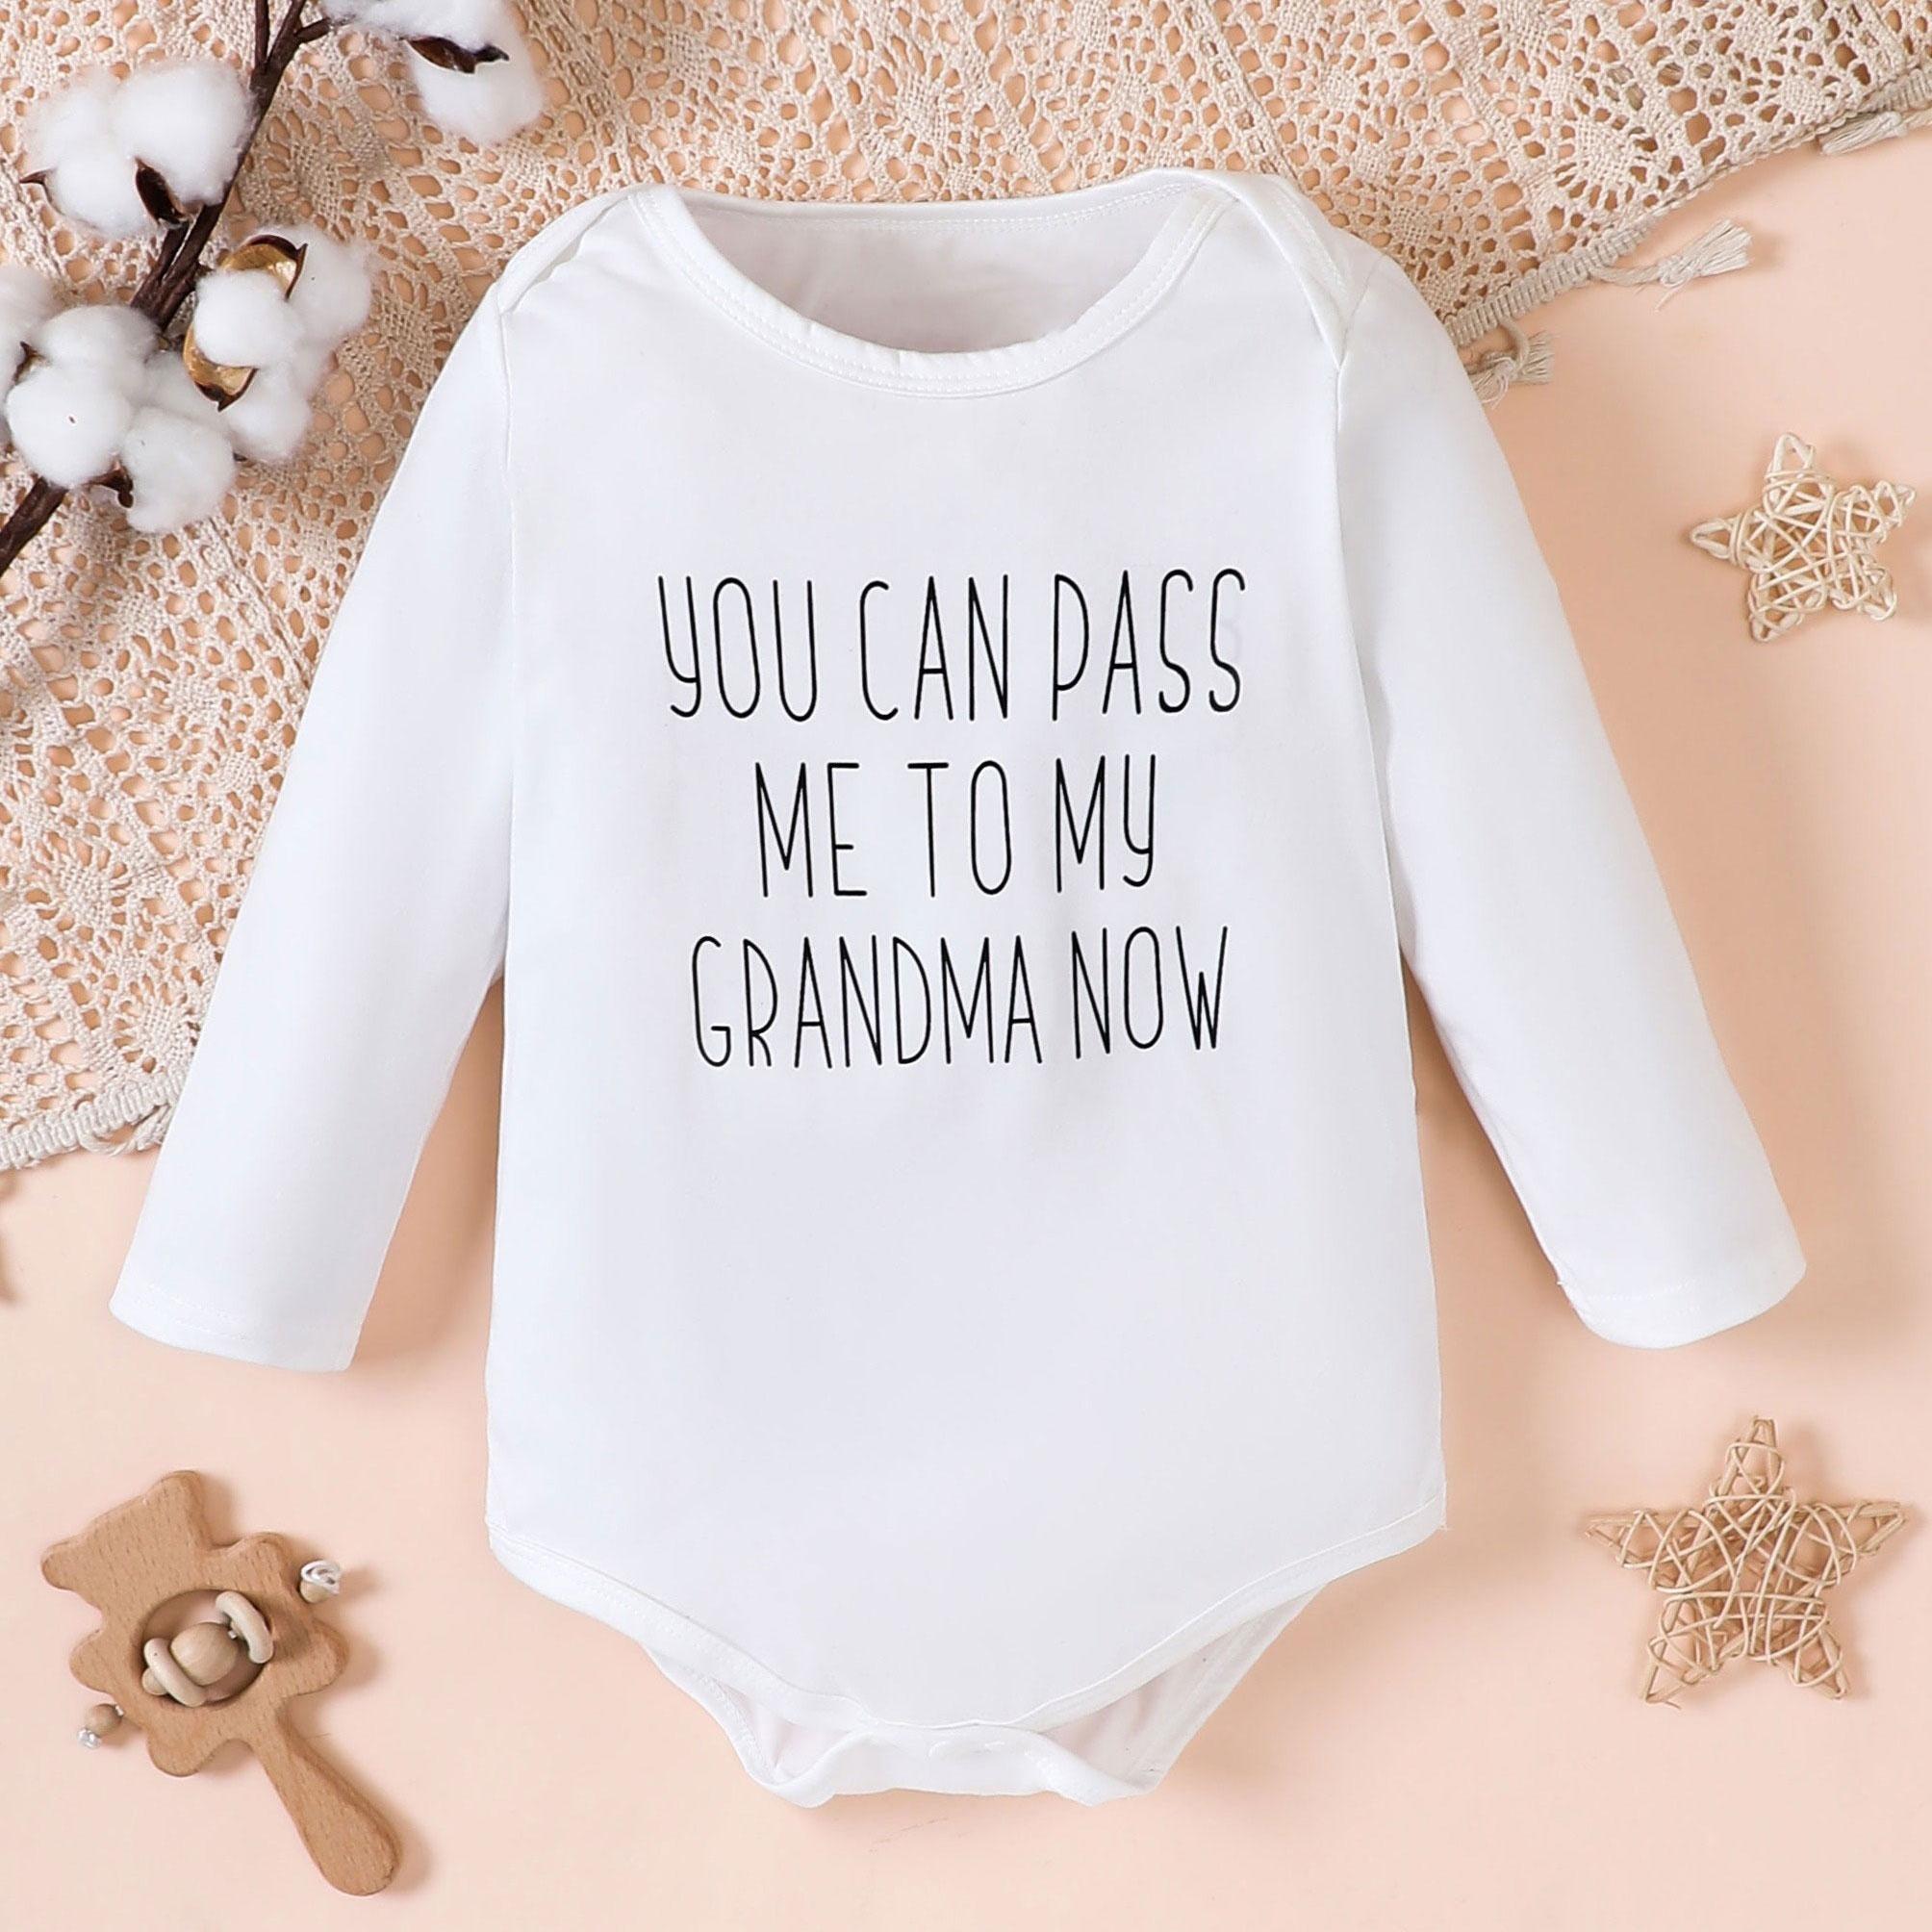 Beliangwings I Am Mom's and Dad Masterpiece Funny Newborn Baby Bodysuits Boy Girl Casual Long Sleeve Jumpsuit Playsuits Outfits Infant Cloth